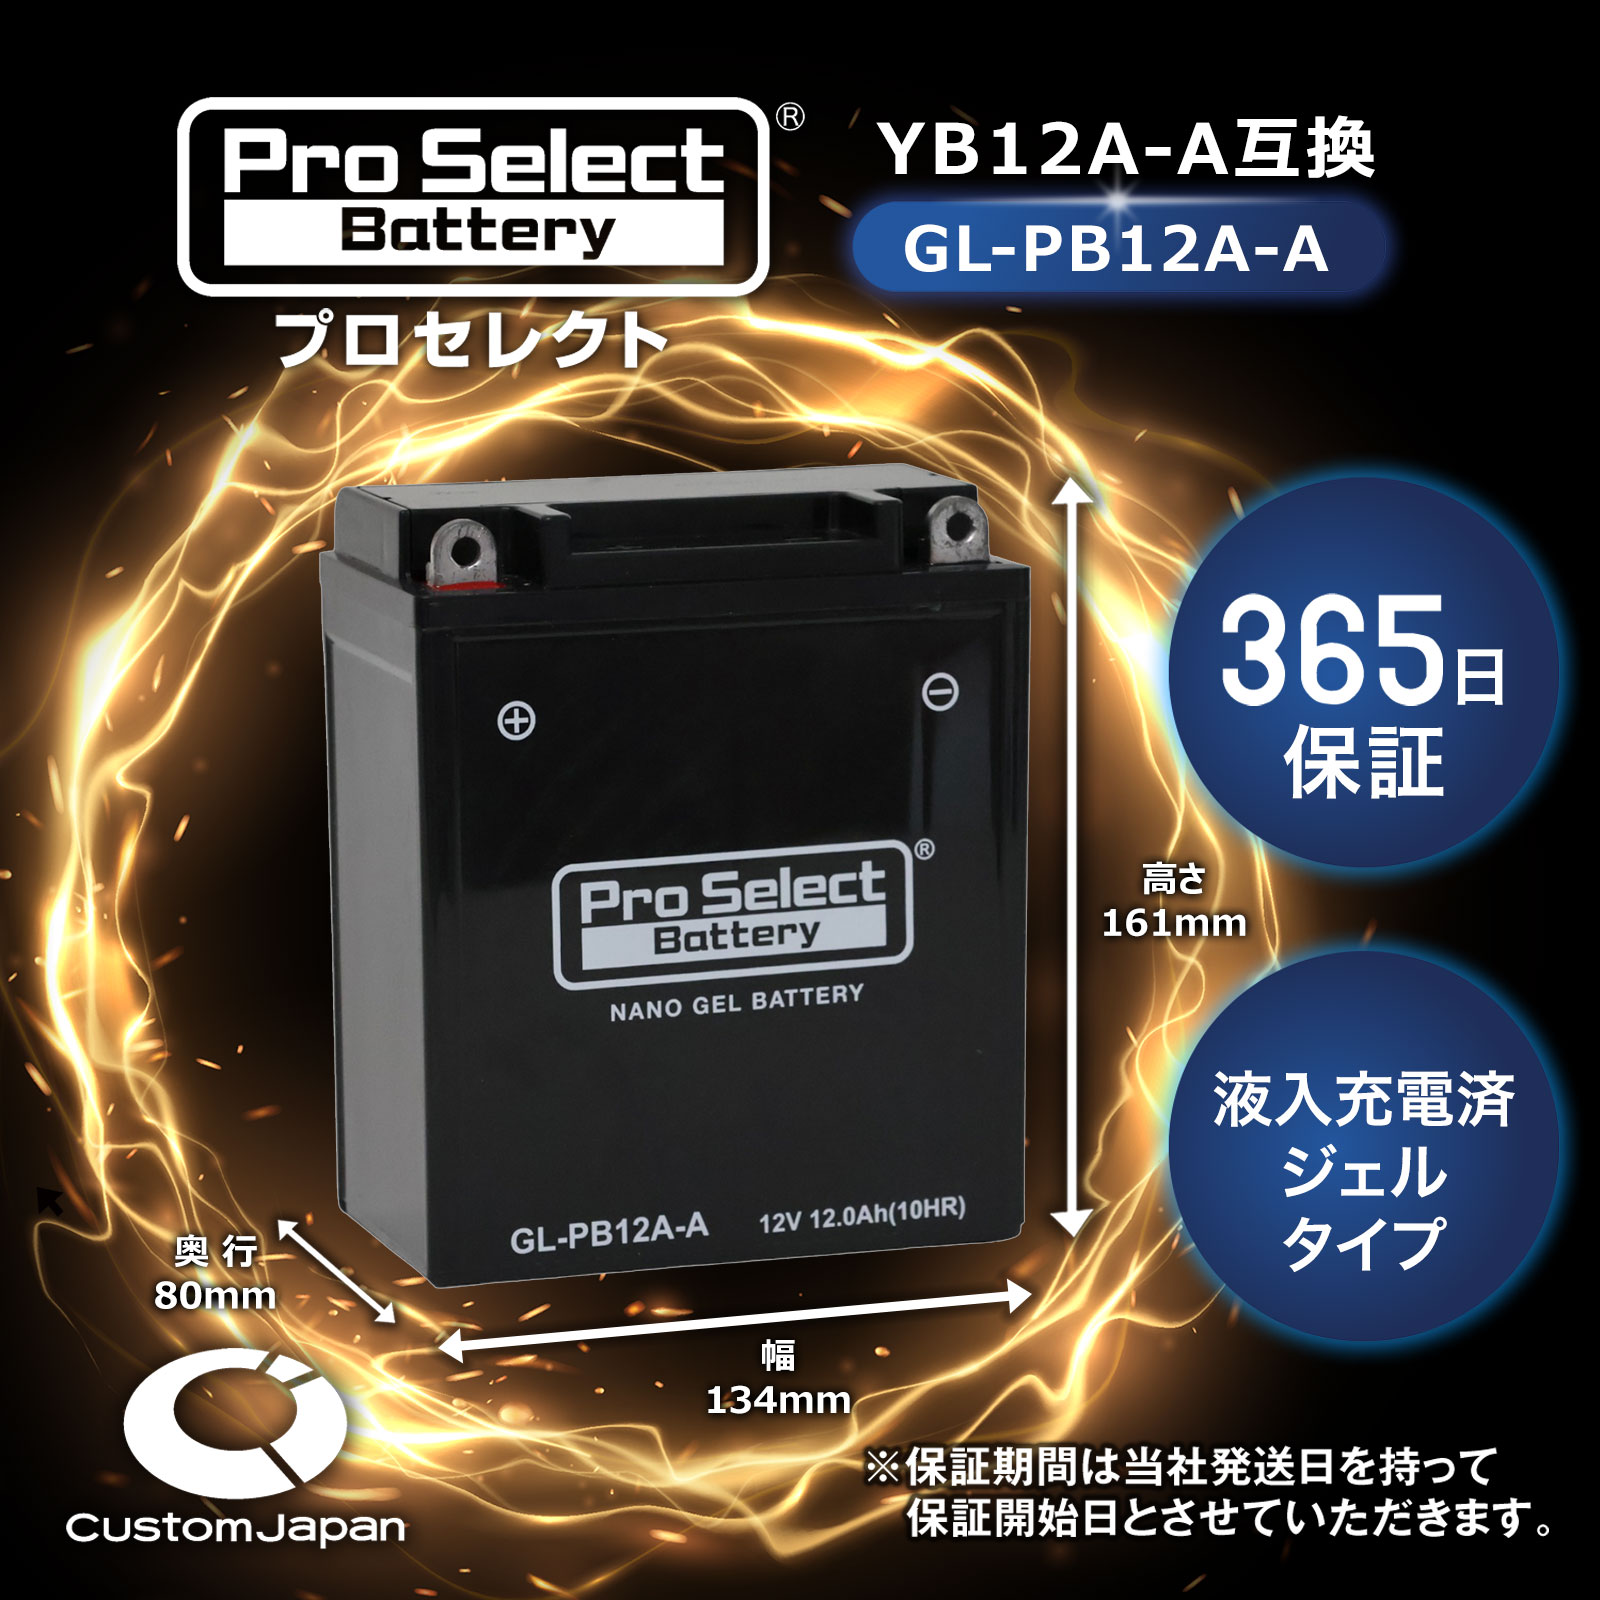 ProSelect( Pro select ) bike GL-PB12A-A nano * gel battery (YB12A-A interchangeable )( gel type fluid go in charge settled ) PSB131 air-tigh type MF